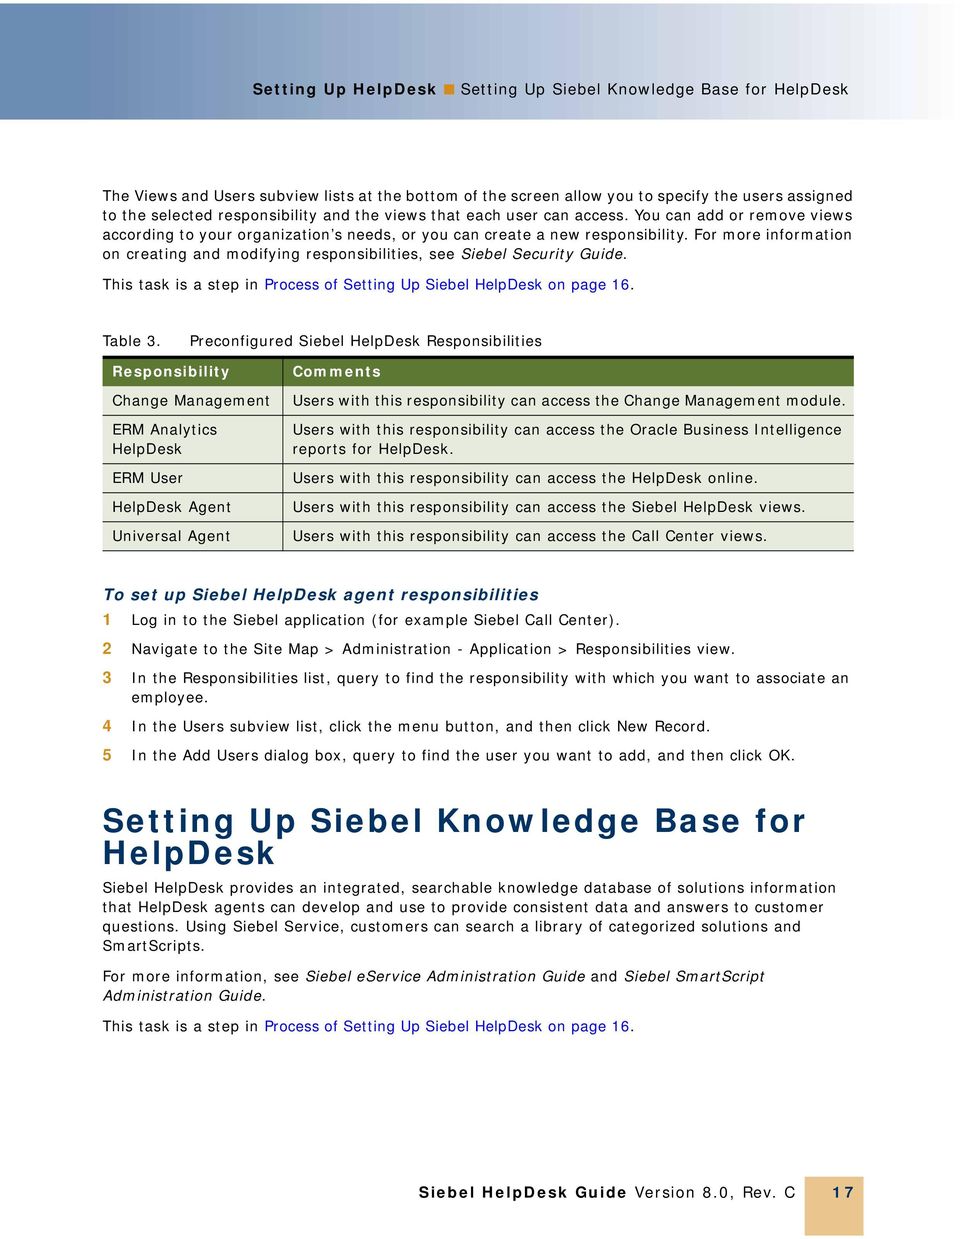 For more information on creating and modifying responsibilities, see Siebel Security Guide. This task is a step in Process of Setting Up Siebel HelpDesk on page 16. Table 3.